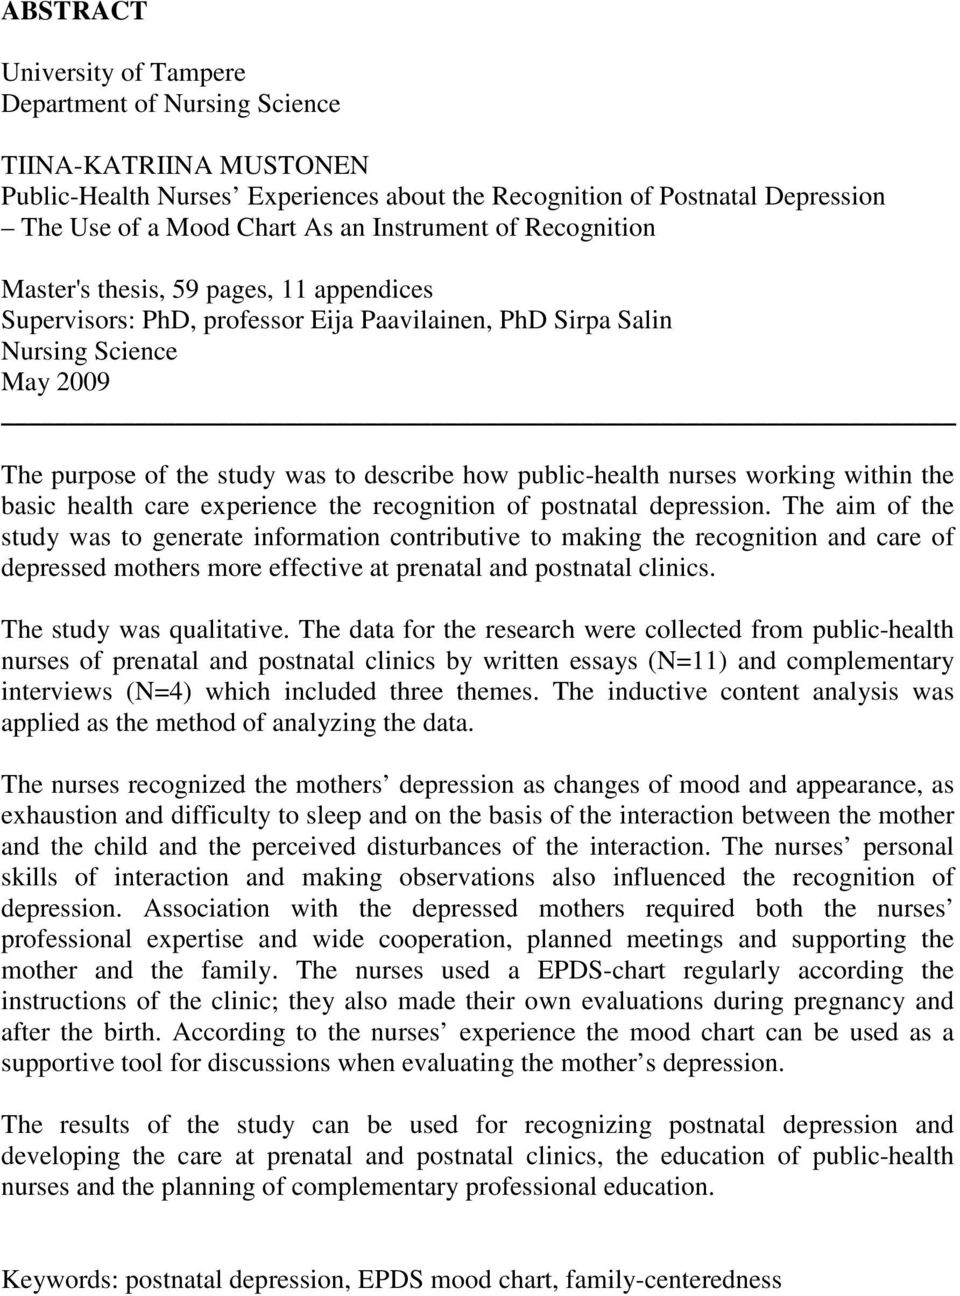 public-health nurses working within the basic health care experience the recognition of postnatal depression.